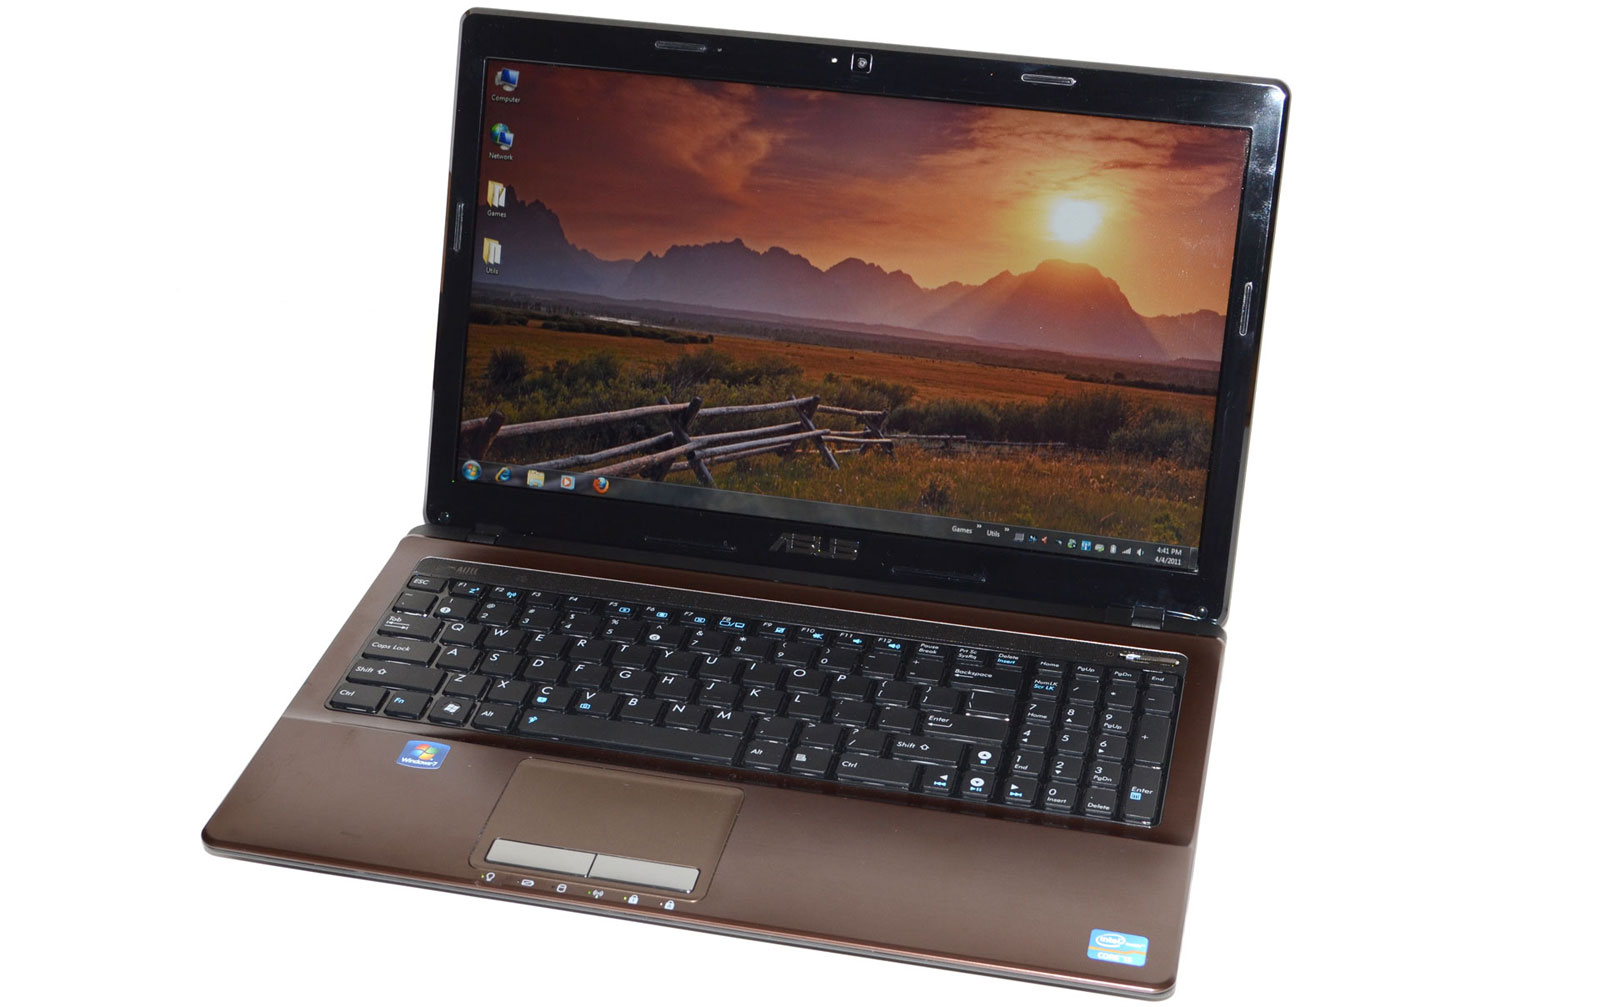 Asus K53e Drivers Download For Windows 7 8 10 Os 32 64 Bit